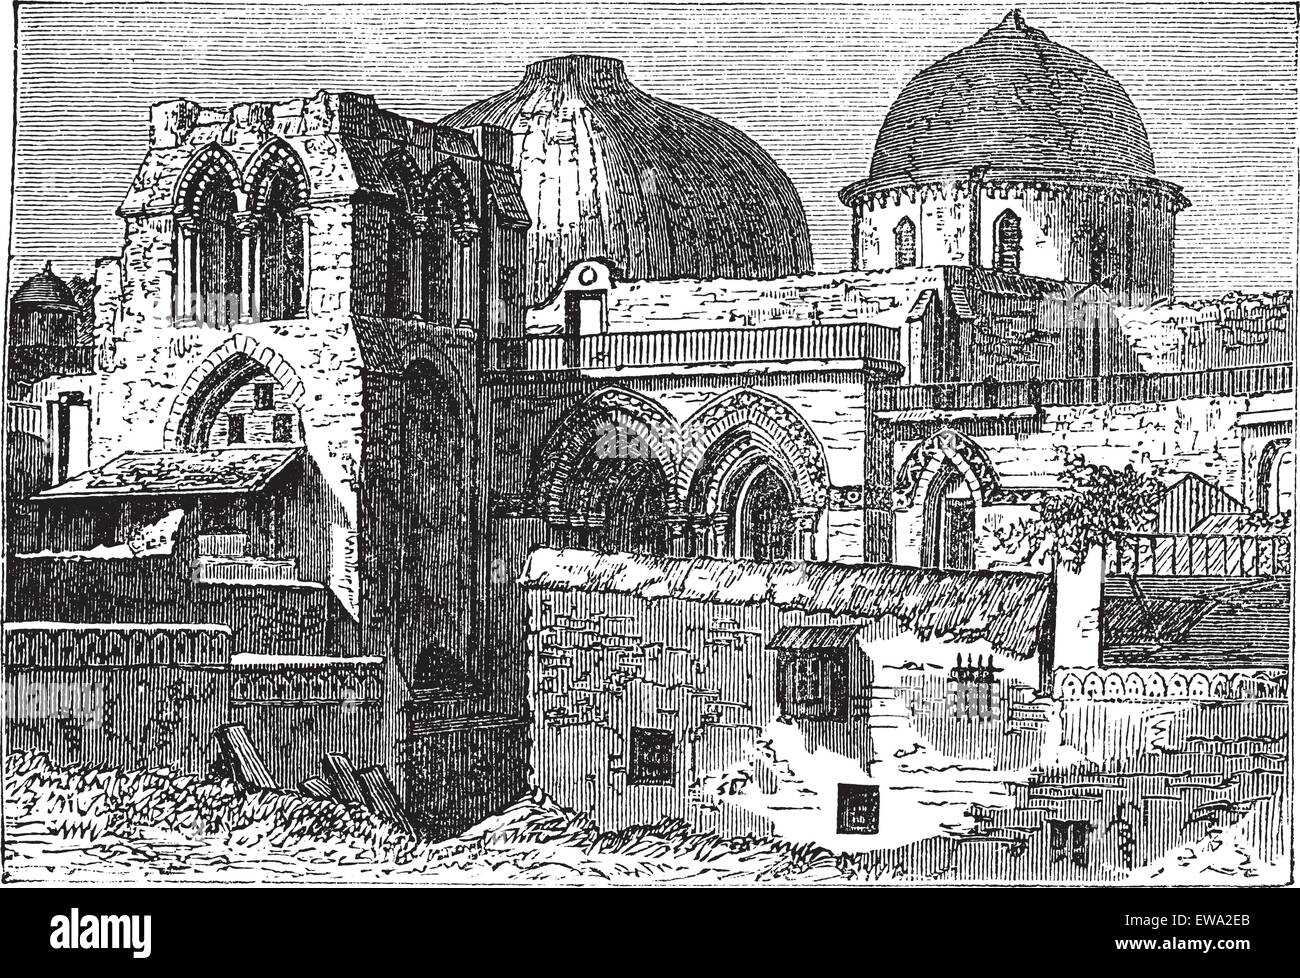 Church of the Holy Sepulchre or Church of the Resurrection in Jerusalem, Israel, during the 1890s, vintage engraving. Old engraved illustration of Church of the Holy Sepulchre. Stock Vector